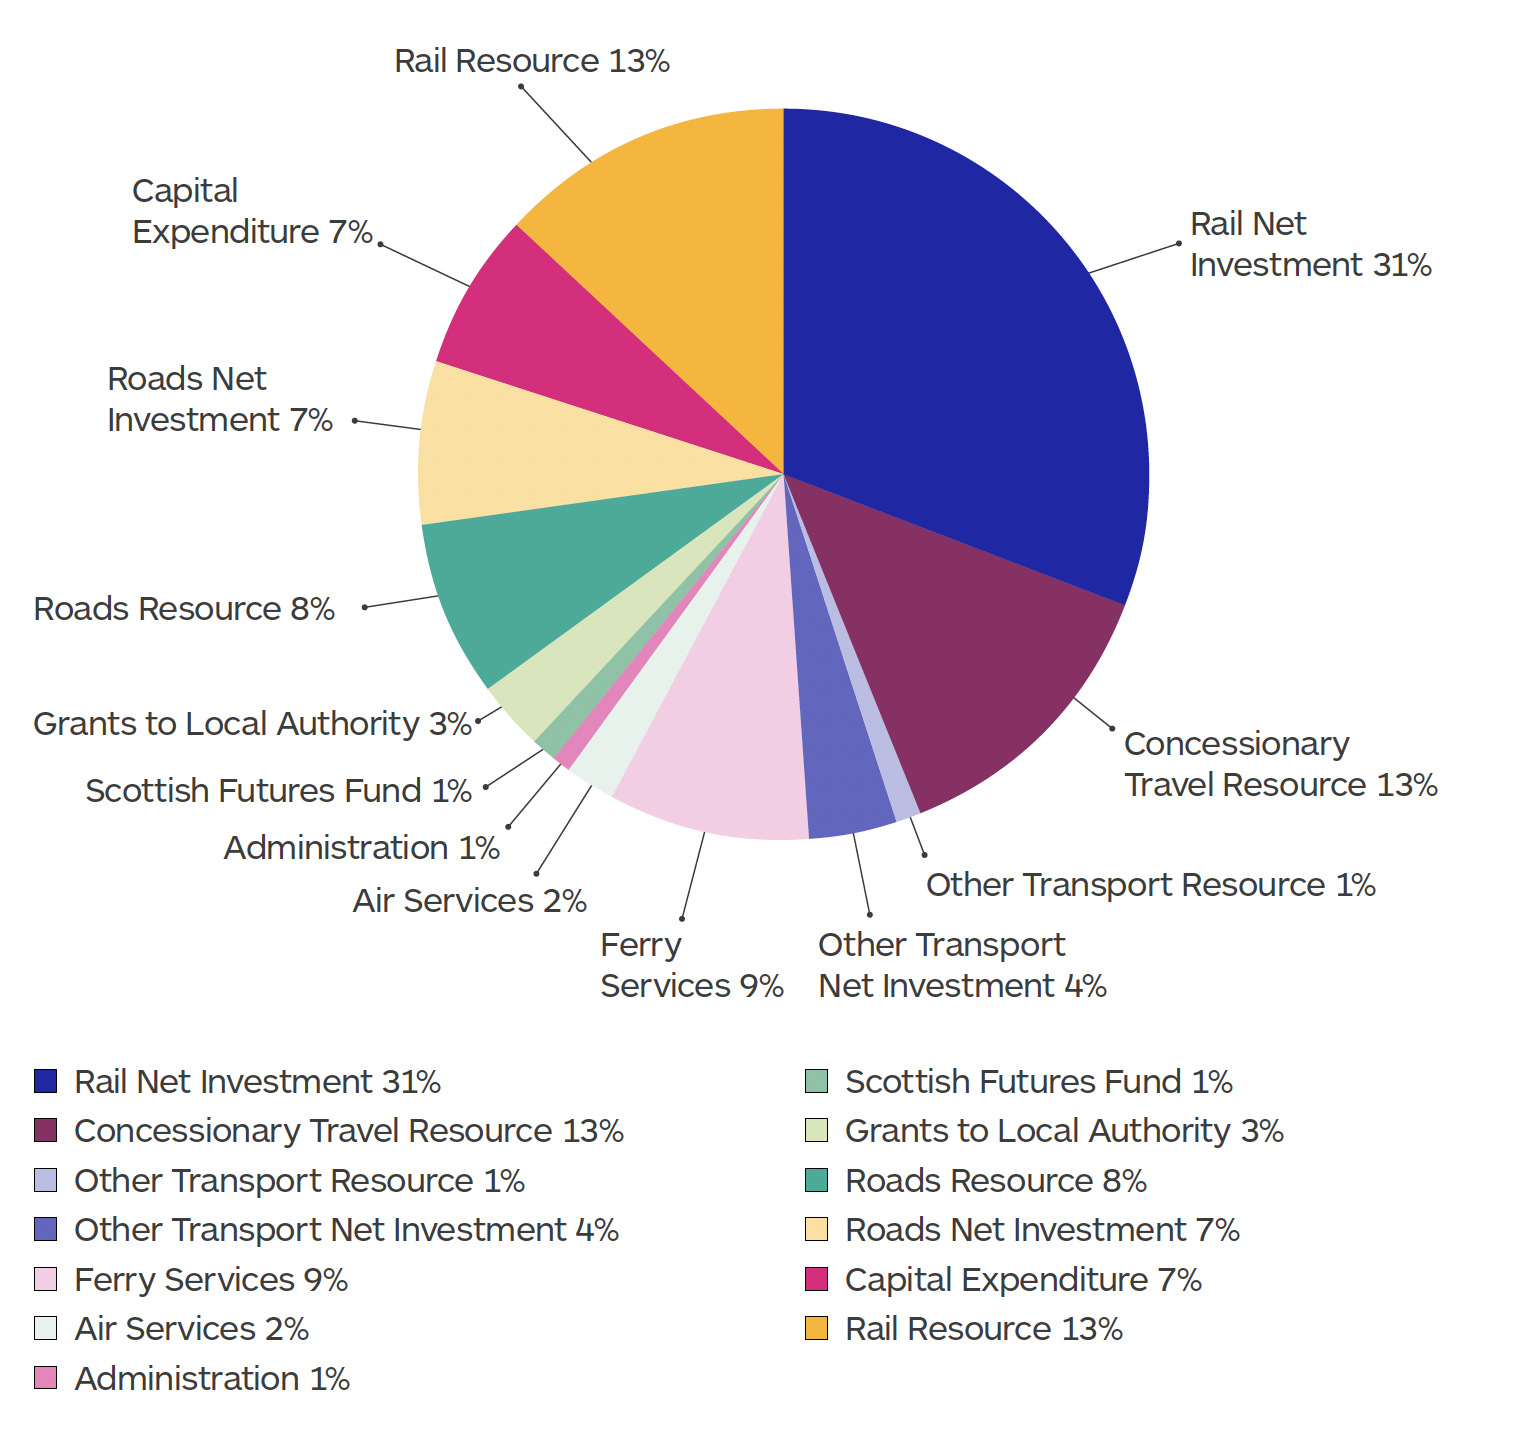 The graphic on this page shows a multi coloured pie chart split into 13 sections to show percentage spend on each area of service provision. Each section is labelled as follows, starting at the top right and moving clockwise. 31% Rail Net Investment, 13% Concessionary Travel Resource, 1% Other Transport Resource, 4% Other Transport Net Investment, 9% Ferry Services, 2% Air Services, 1% Administration, 1% Scottish Futures Fund, 3% Grants to Local Authority, 8% Roads Resource, 7% Roads Net Investment, 7% Capital Expenditure, 13% Rail Resource. End of graphic.